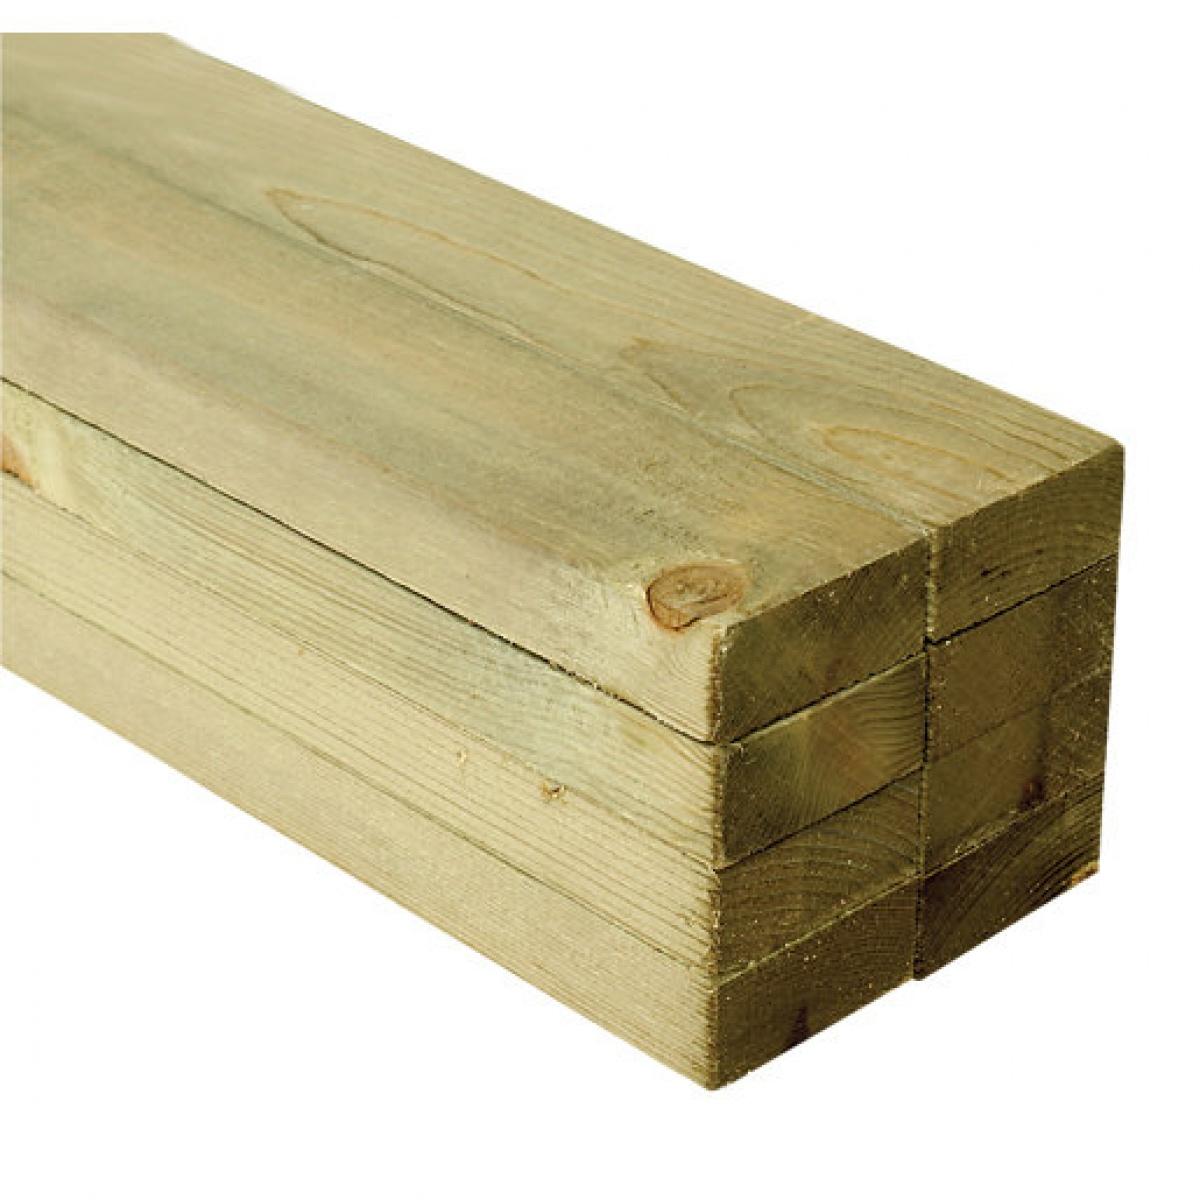 Browse the huge range of Ungraded Treated Carcassing available Online from Nottage Timber Merchants. Perfect for Any Professional, Trade or DIY Application